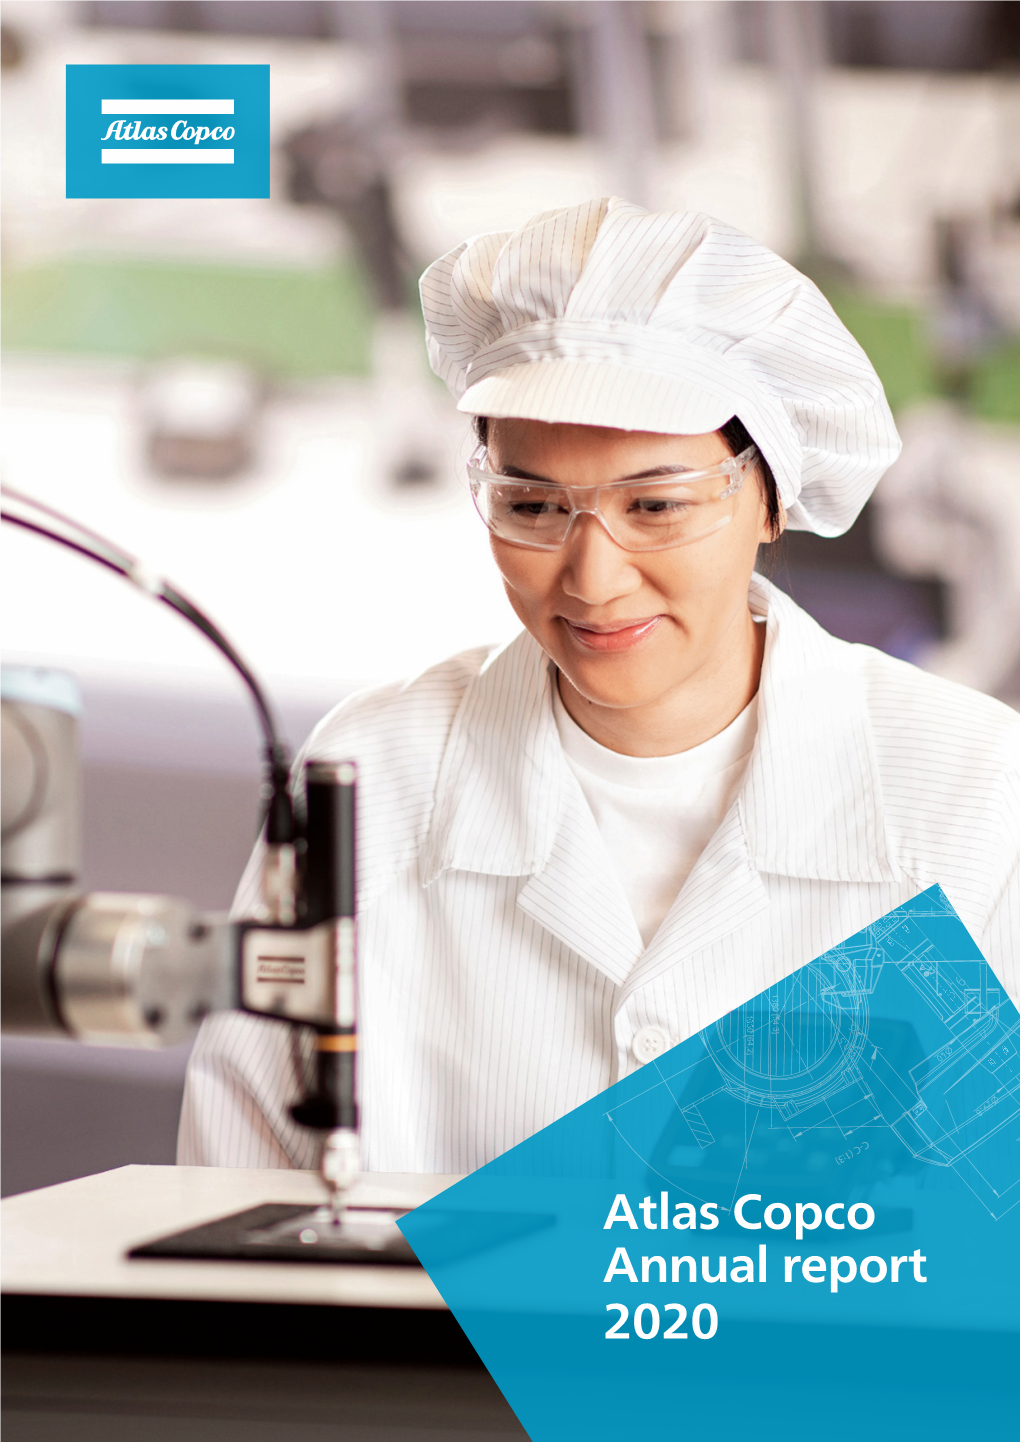 20210311 Atlas Copco Publishes Its Annual Report for 2020